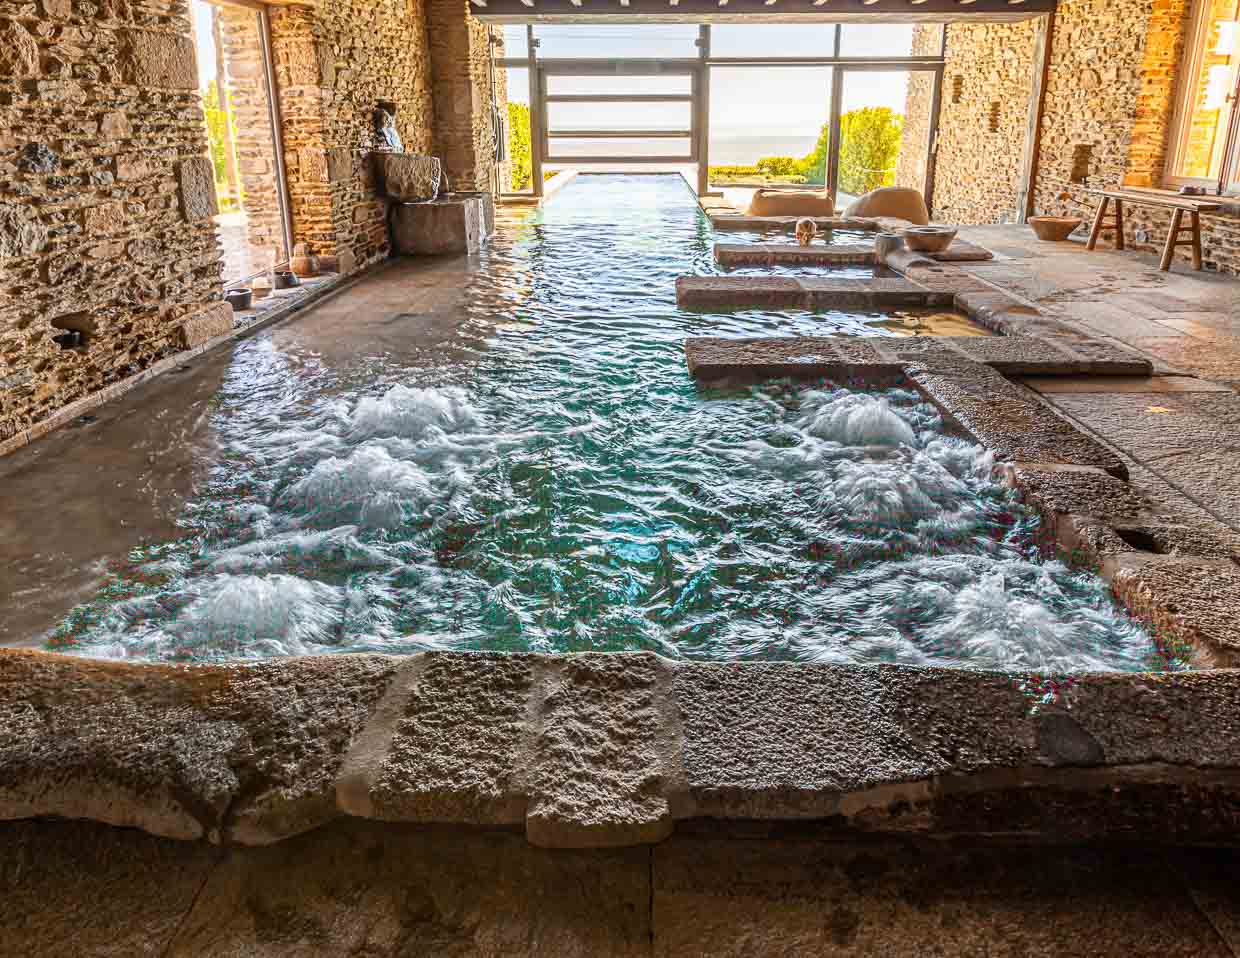 The Celtic bath at the Ferme du Vent in Brittany / © Photo: Georg Berg